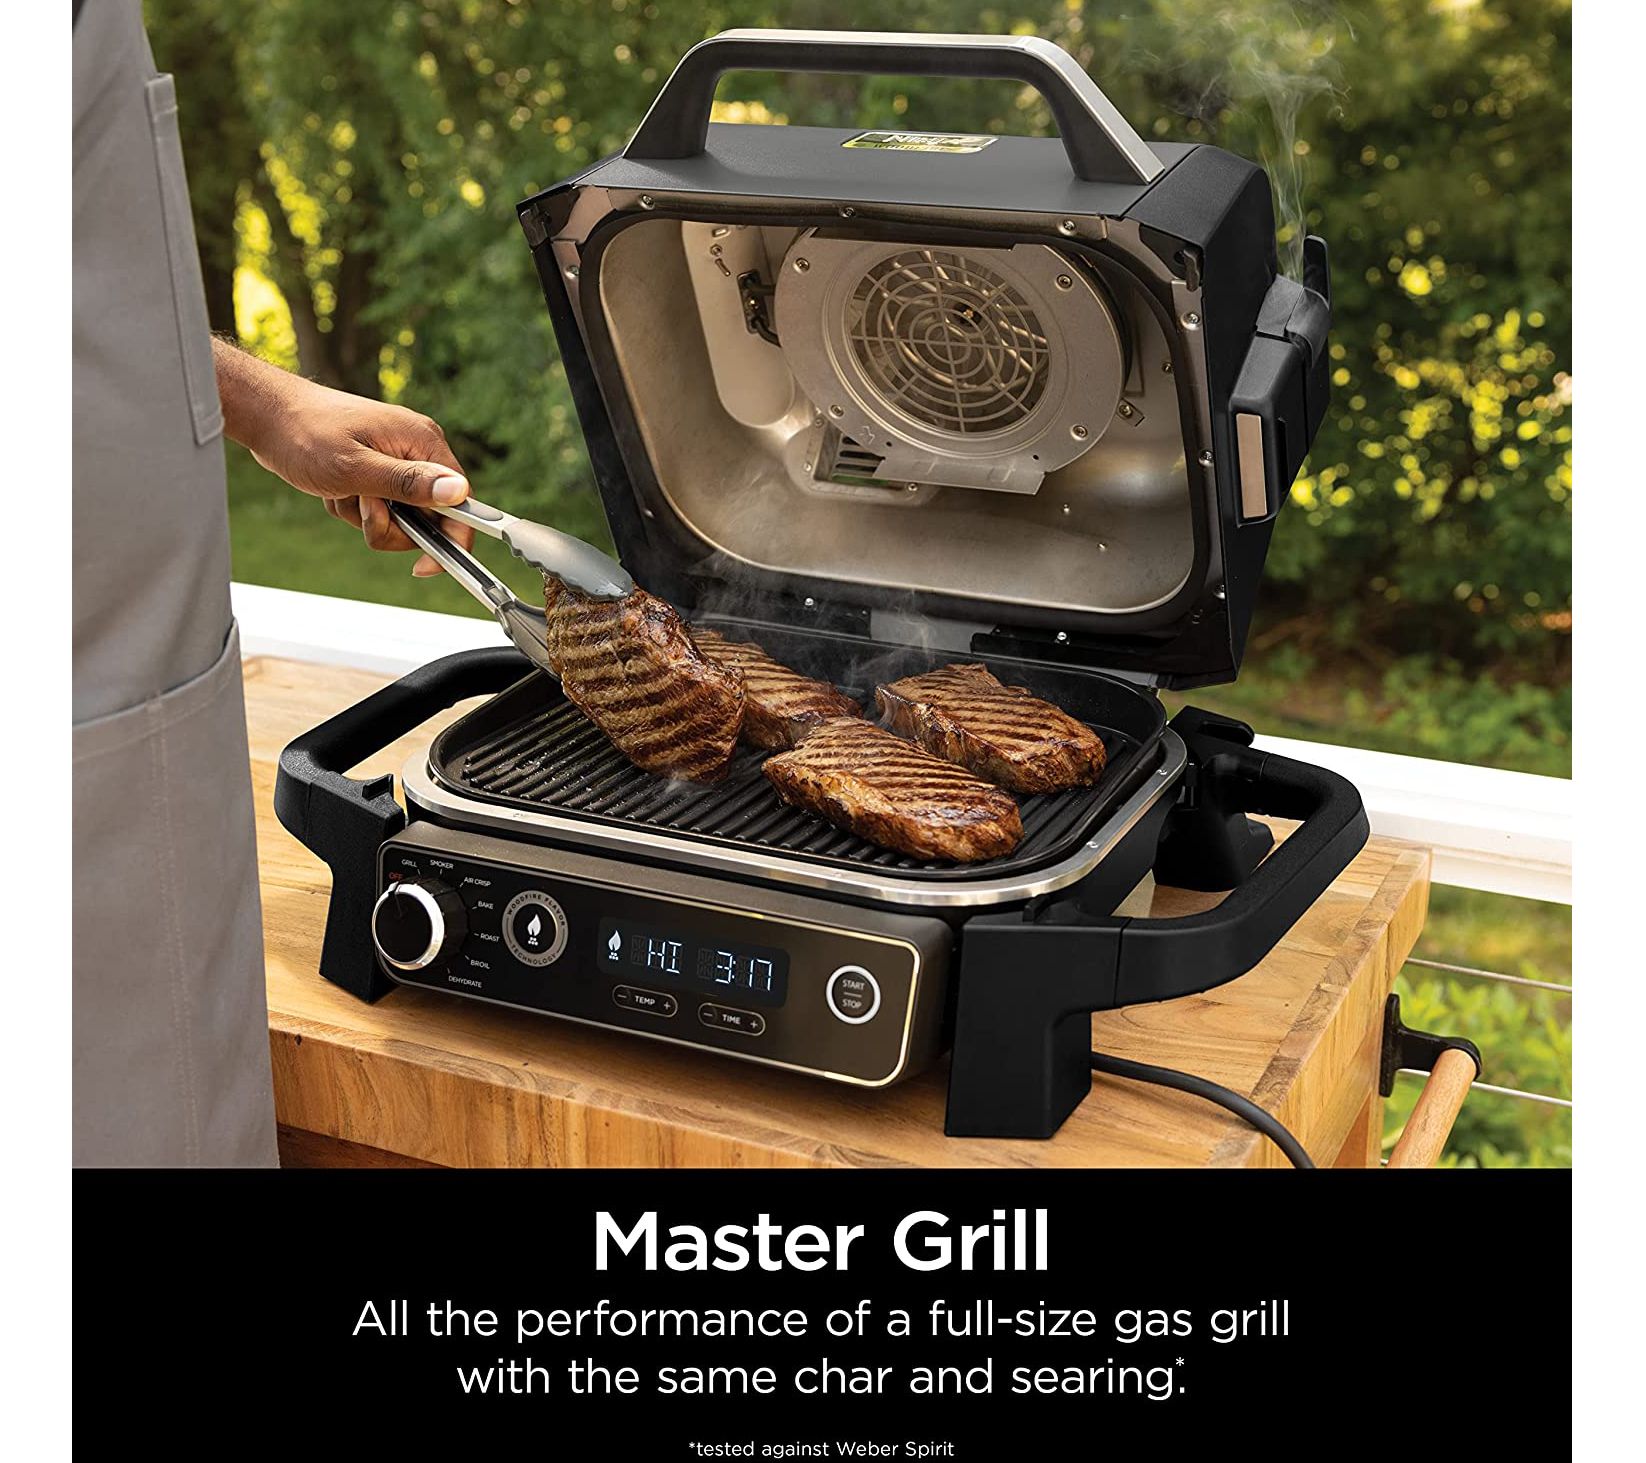 Ninja Woodfire Outdoor Grill And Accessories : Target